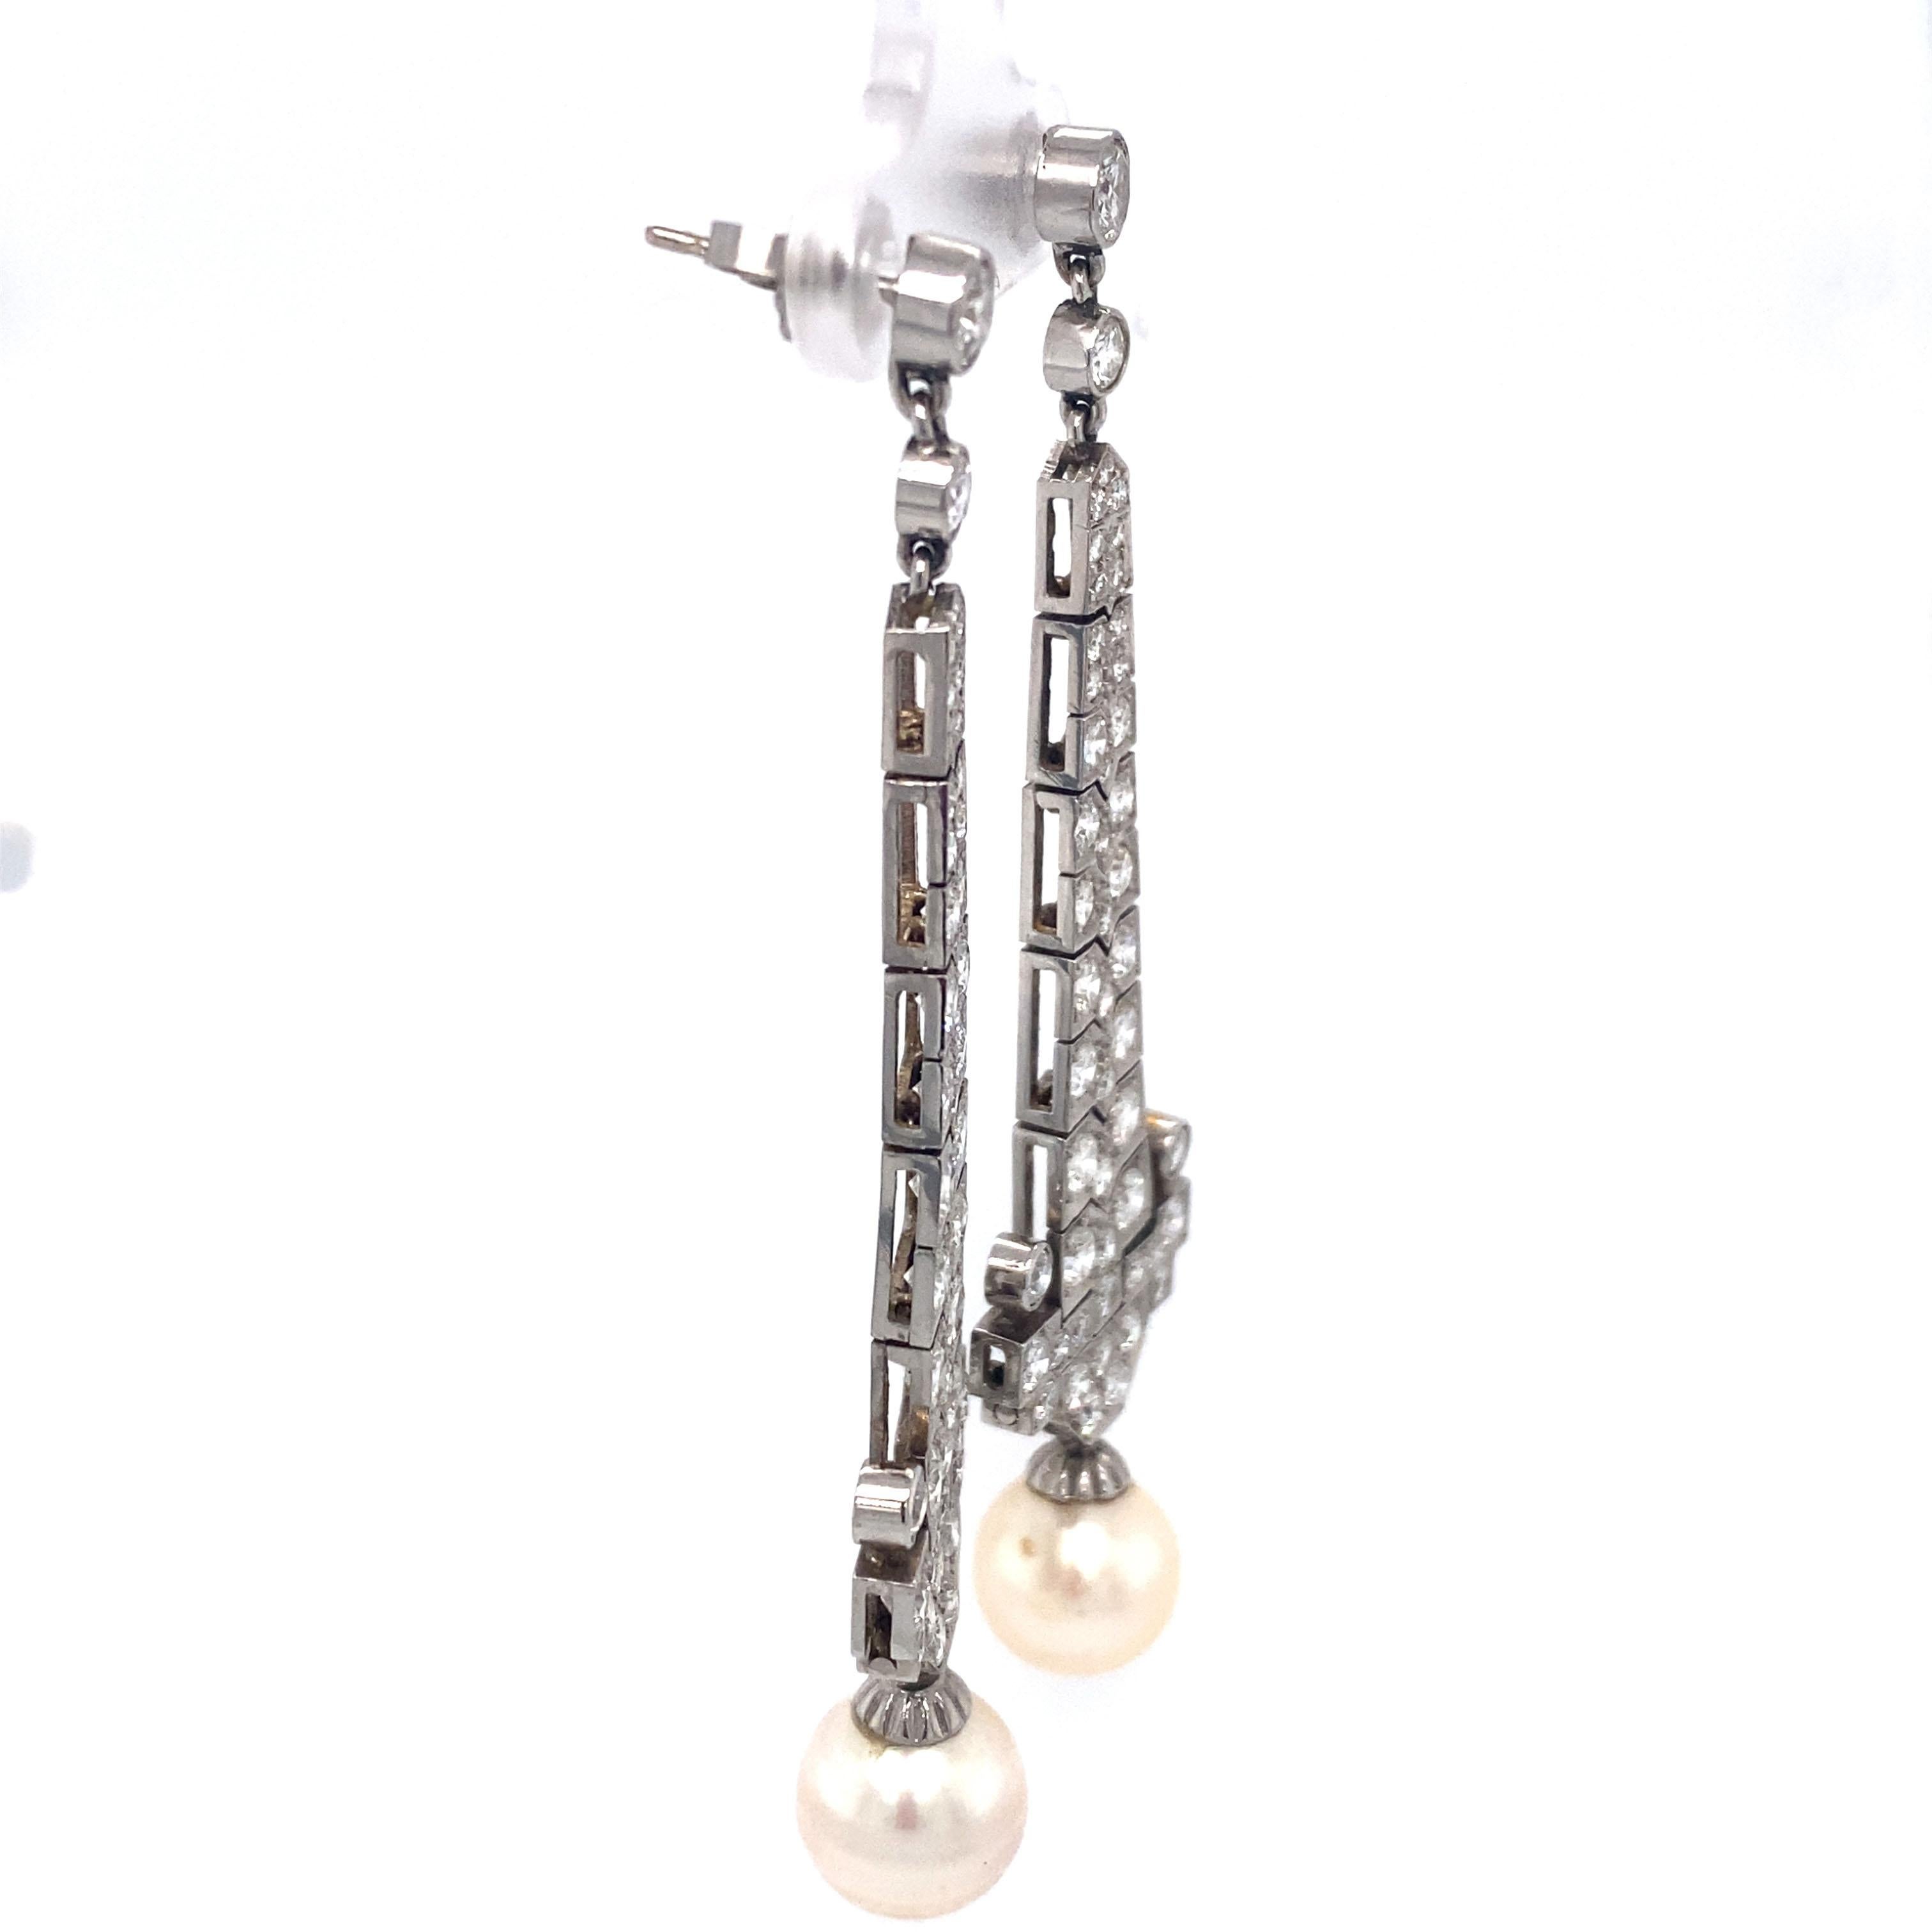 Beautifully crafted 14 Karat White Gold Diamond and Pearl Chandelier Earrings.
These are from the 1950s and pack a lot of style and draw a lot of design from the art deco era. They are very light weight when worn. The sparkling white diamonds are